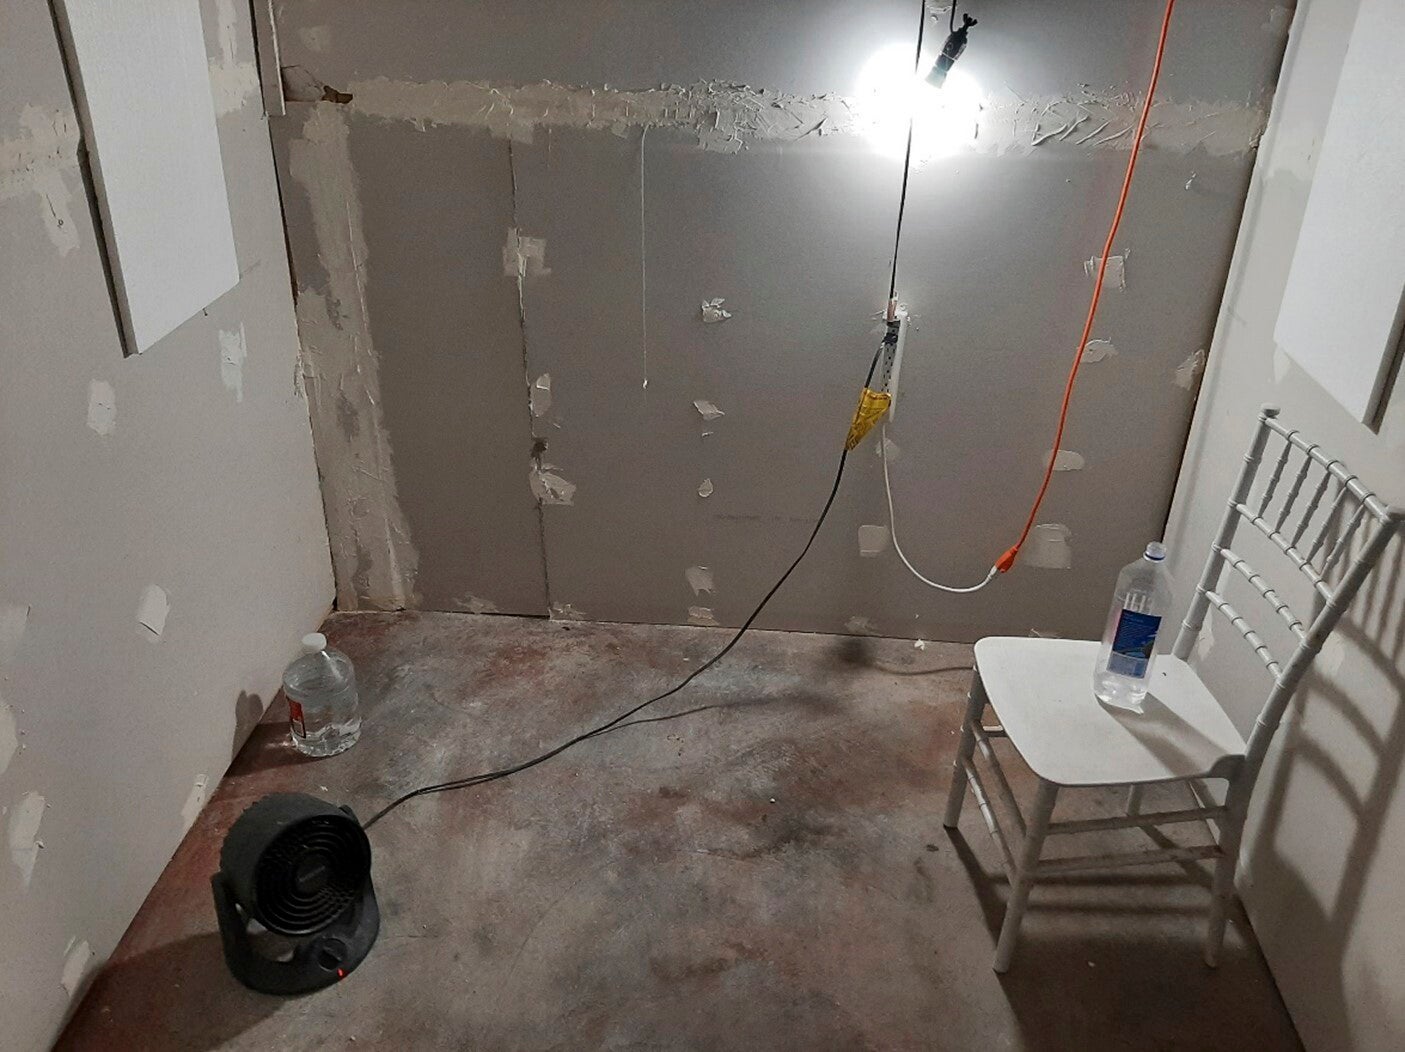 The cinderblock cell constructed in the garage of Zuberi’s modest one-storey rental home was soundproof, police say